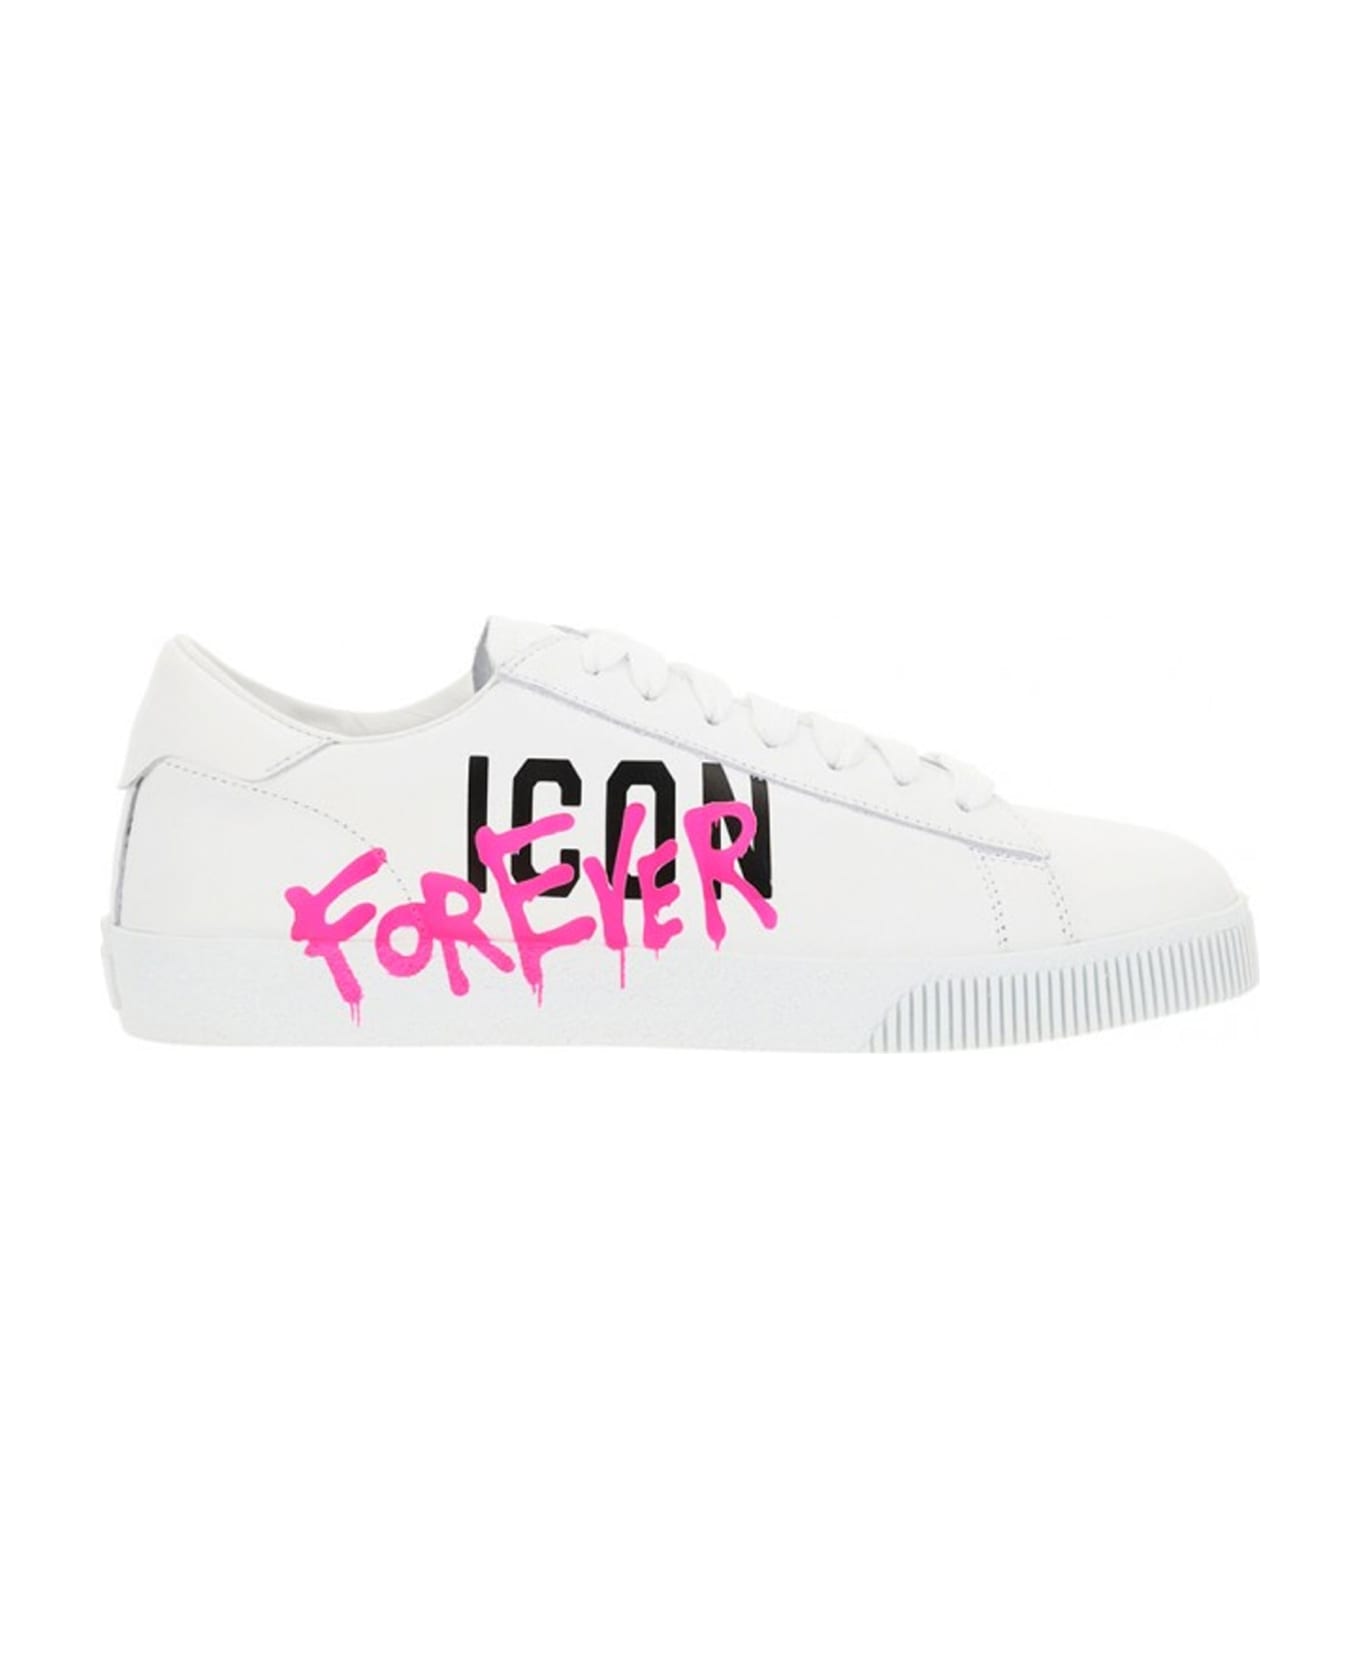 Dsquared2 Printed Leather Sneakers - White